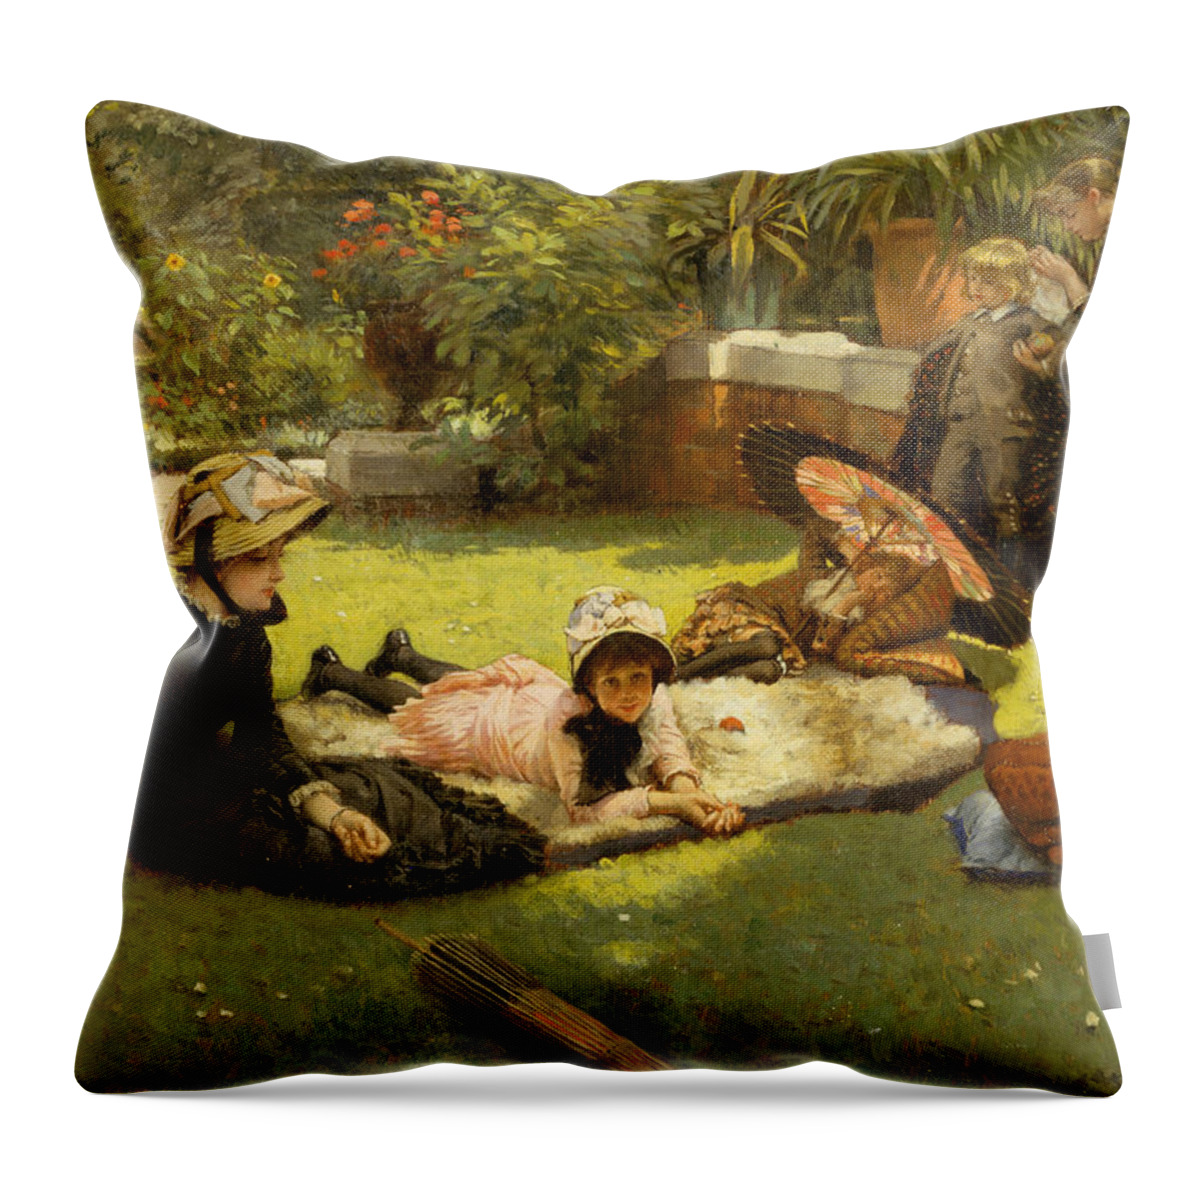 19th Century Art Throw Pillow featuring the painting In Full Sunlight by James Tissot